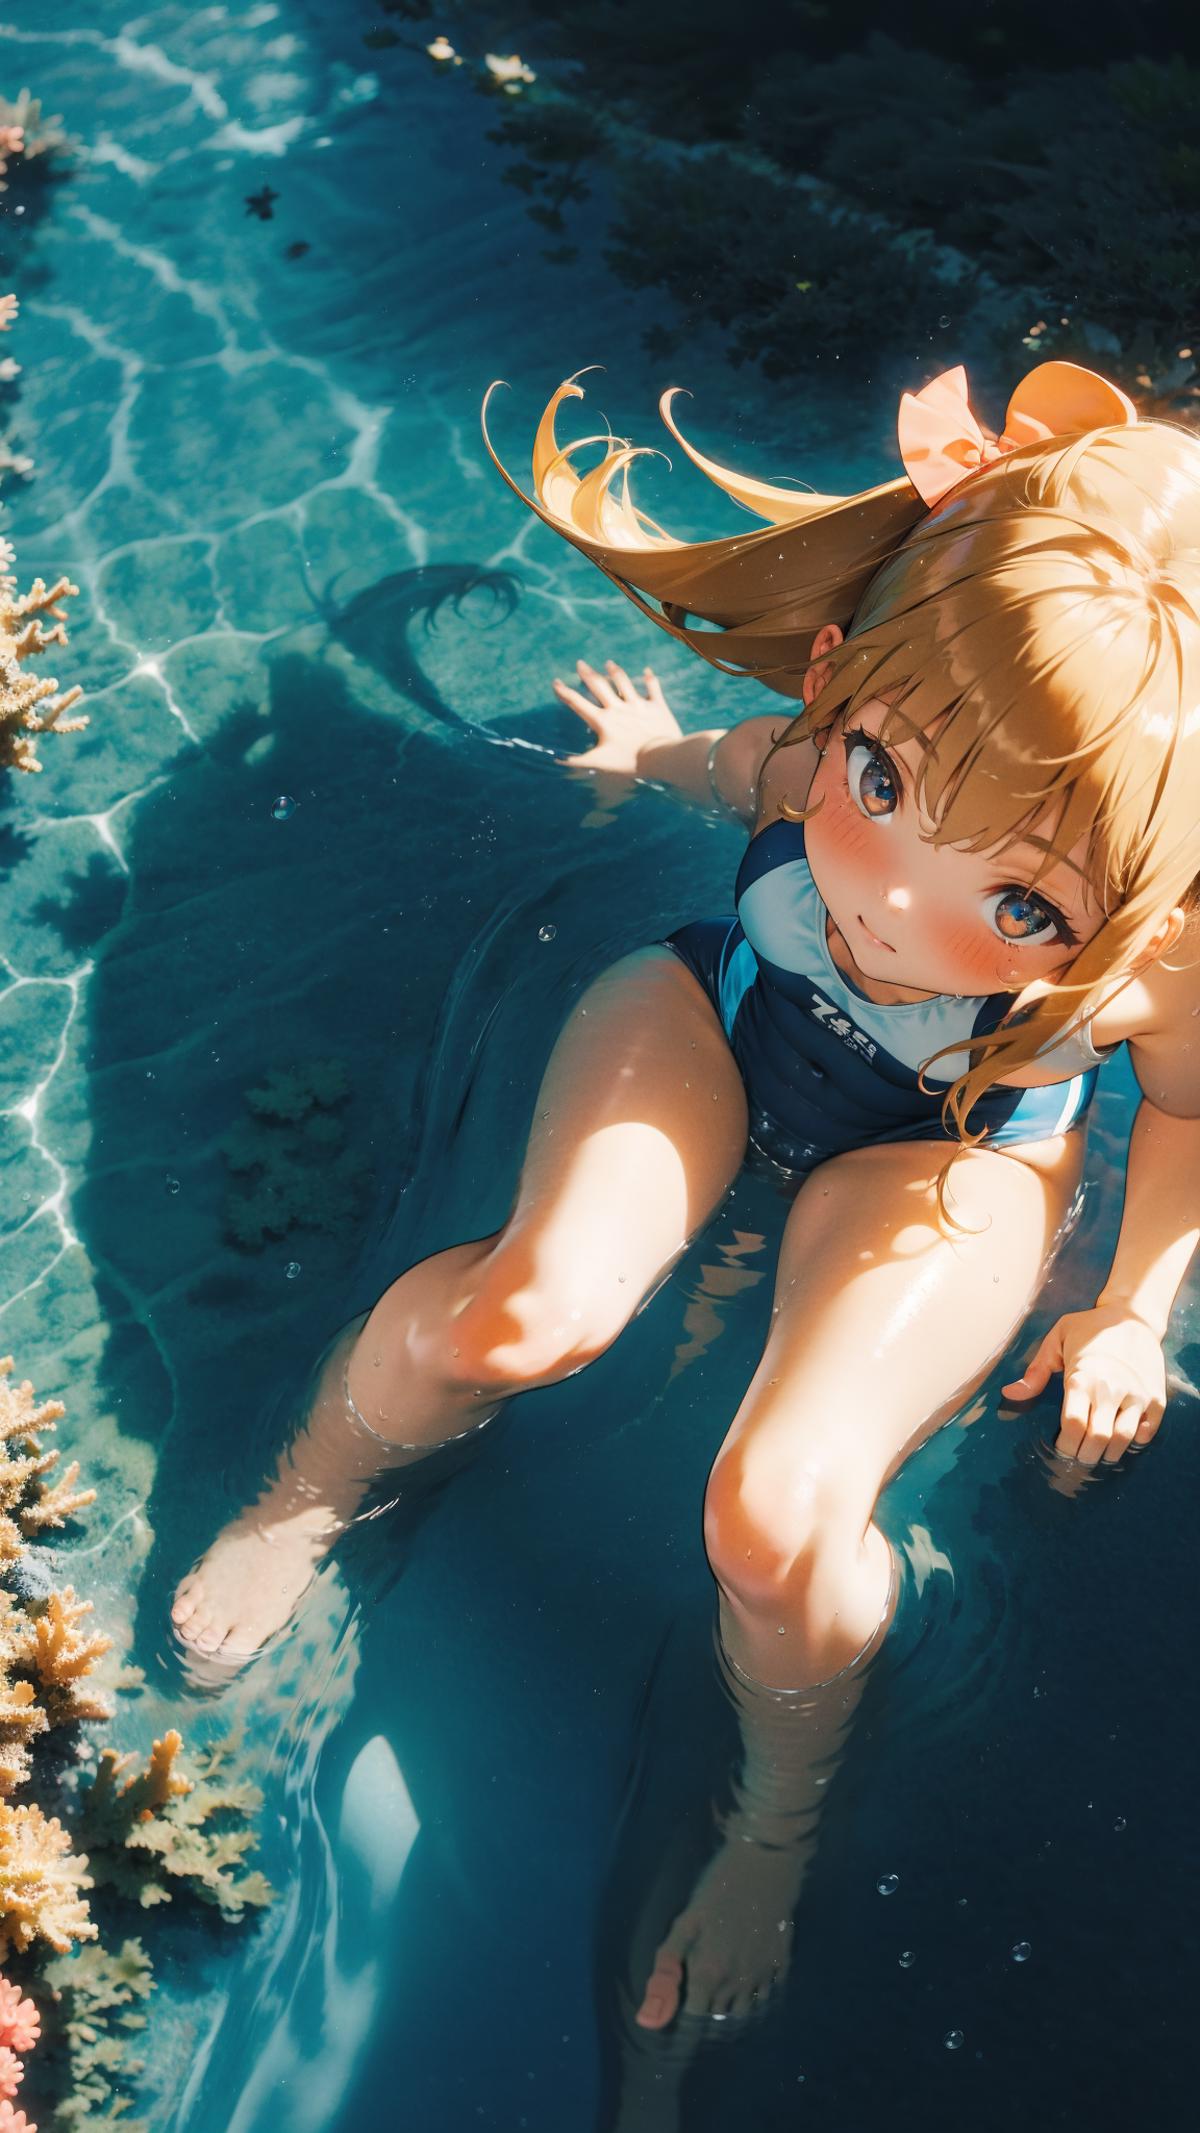 A young girl in a blue swimsuit squatting in a swimming pool.